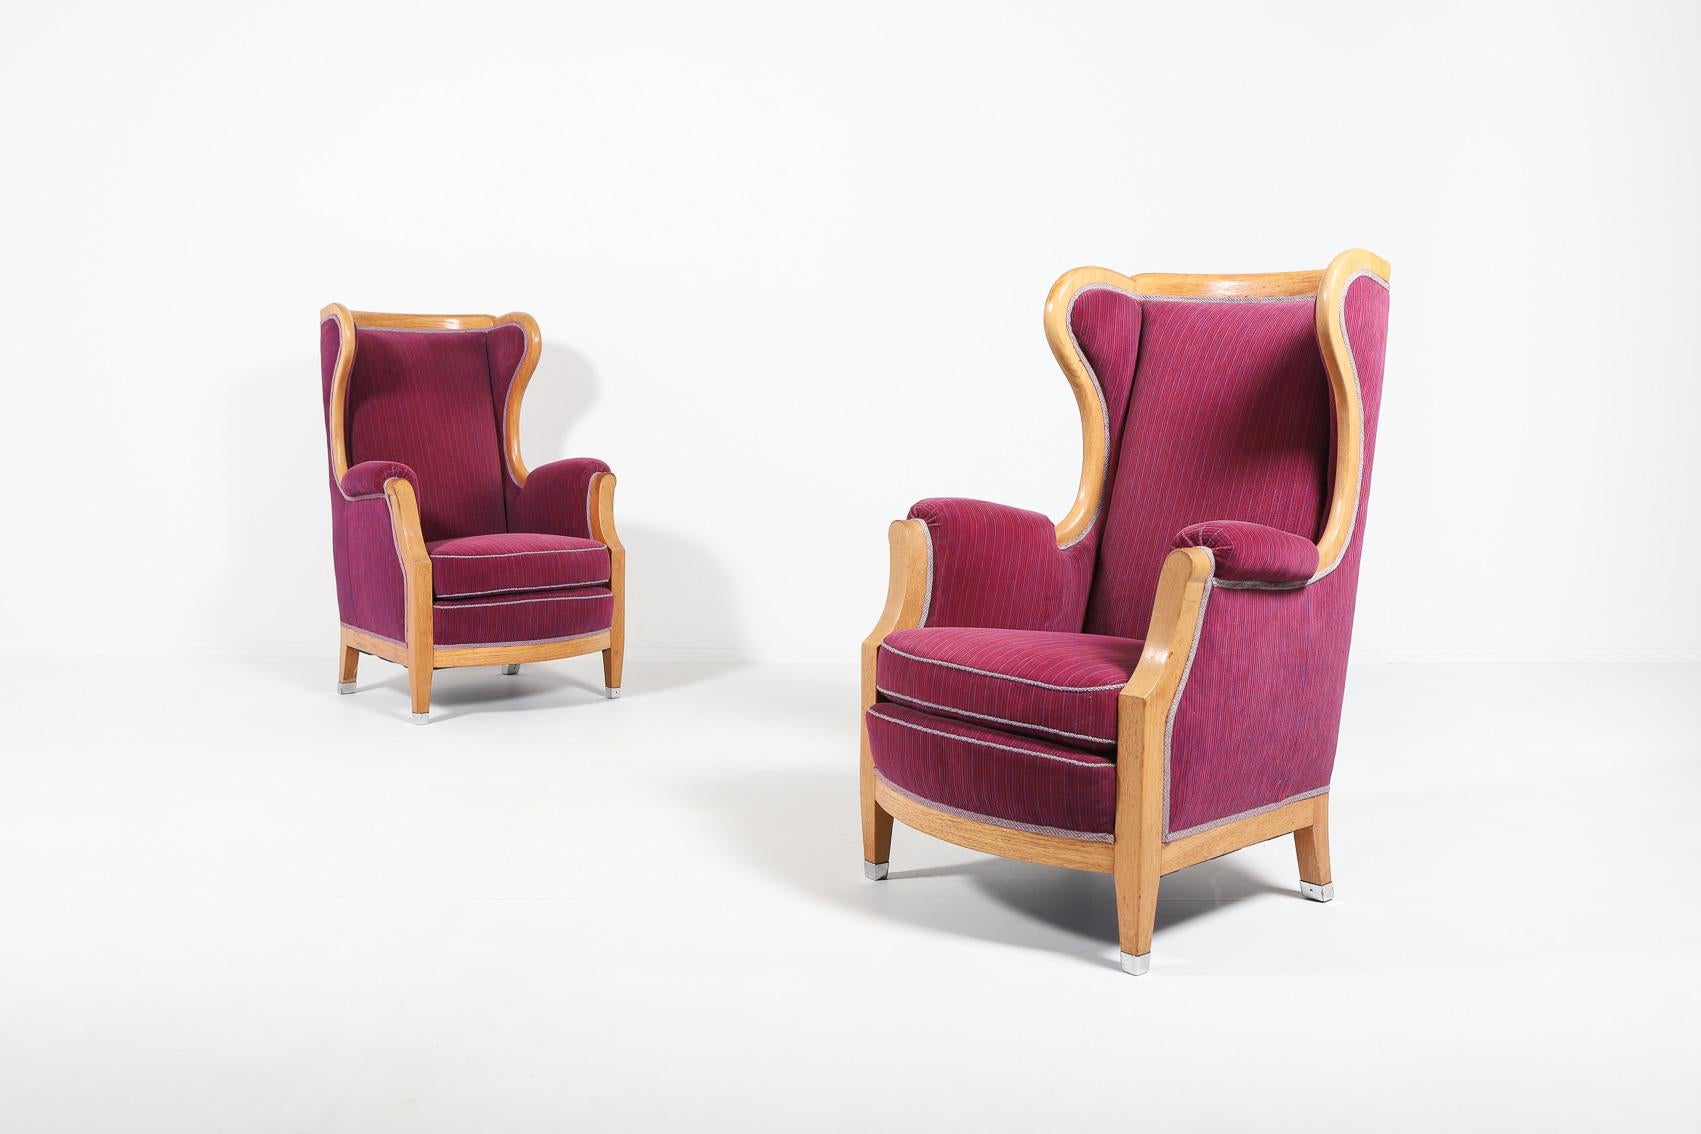 Pair of 2 spectacular lounge armchairs with varnished oak frame and pink purple striped fabric upholstery, loose sitting cushions. The mastery of Swedish architect Oscar Nilsson, aristocratic and sleek at the same time.

Priced for a